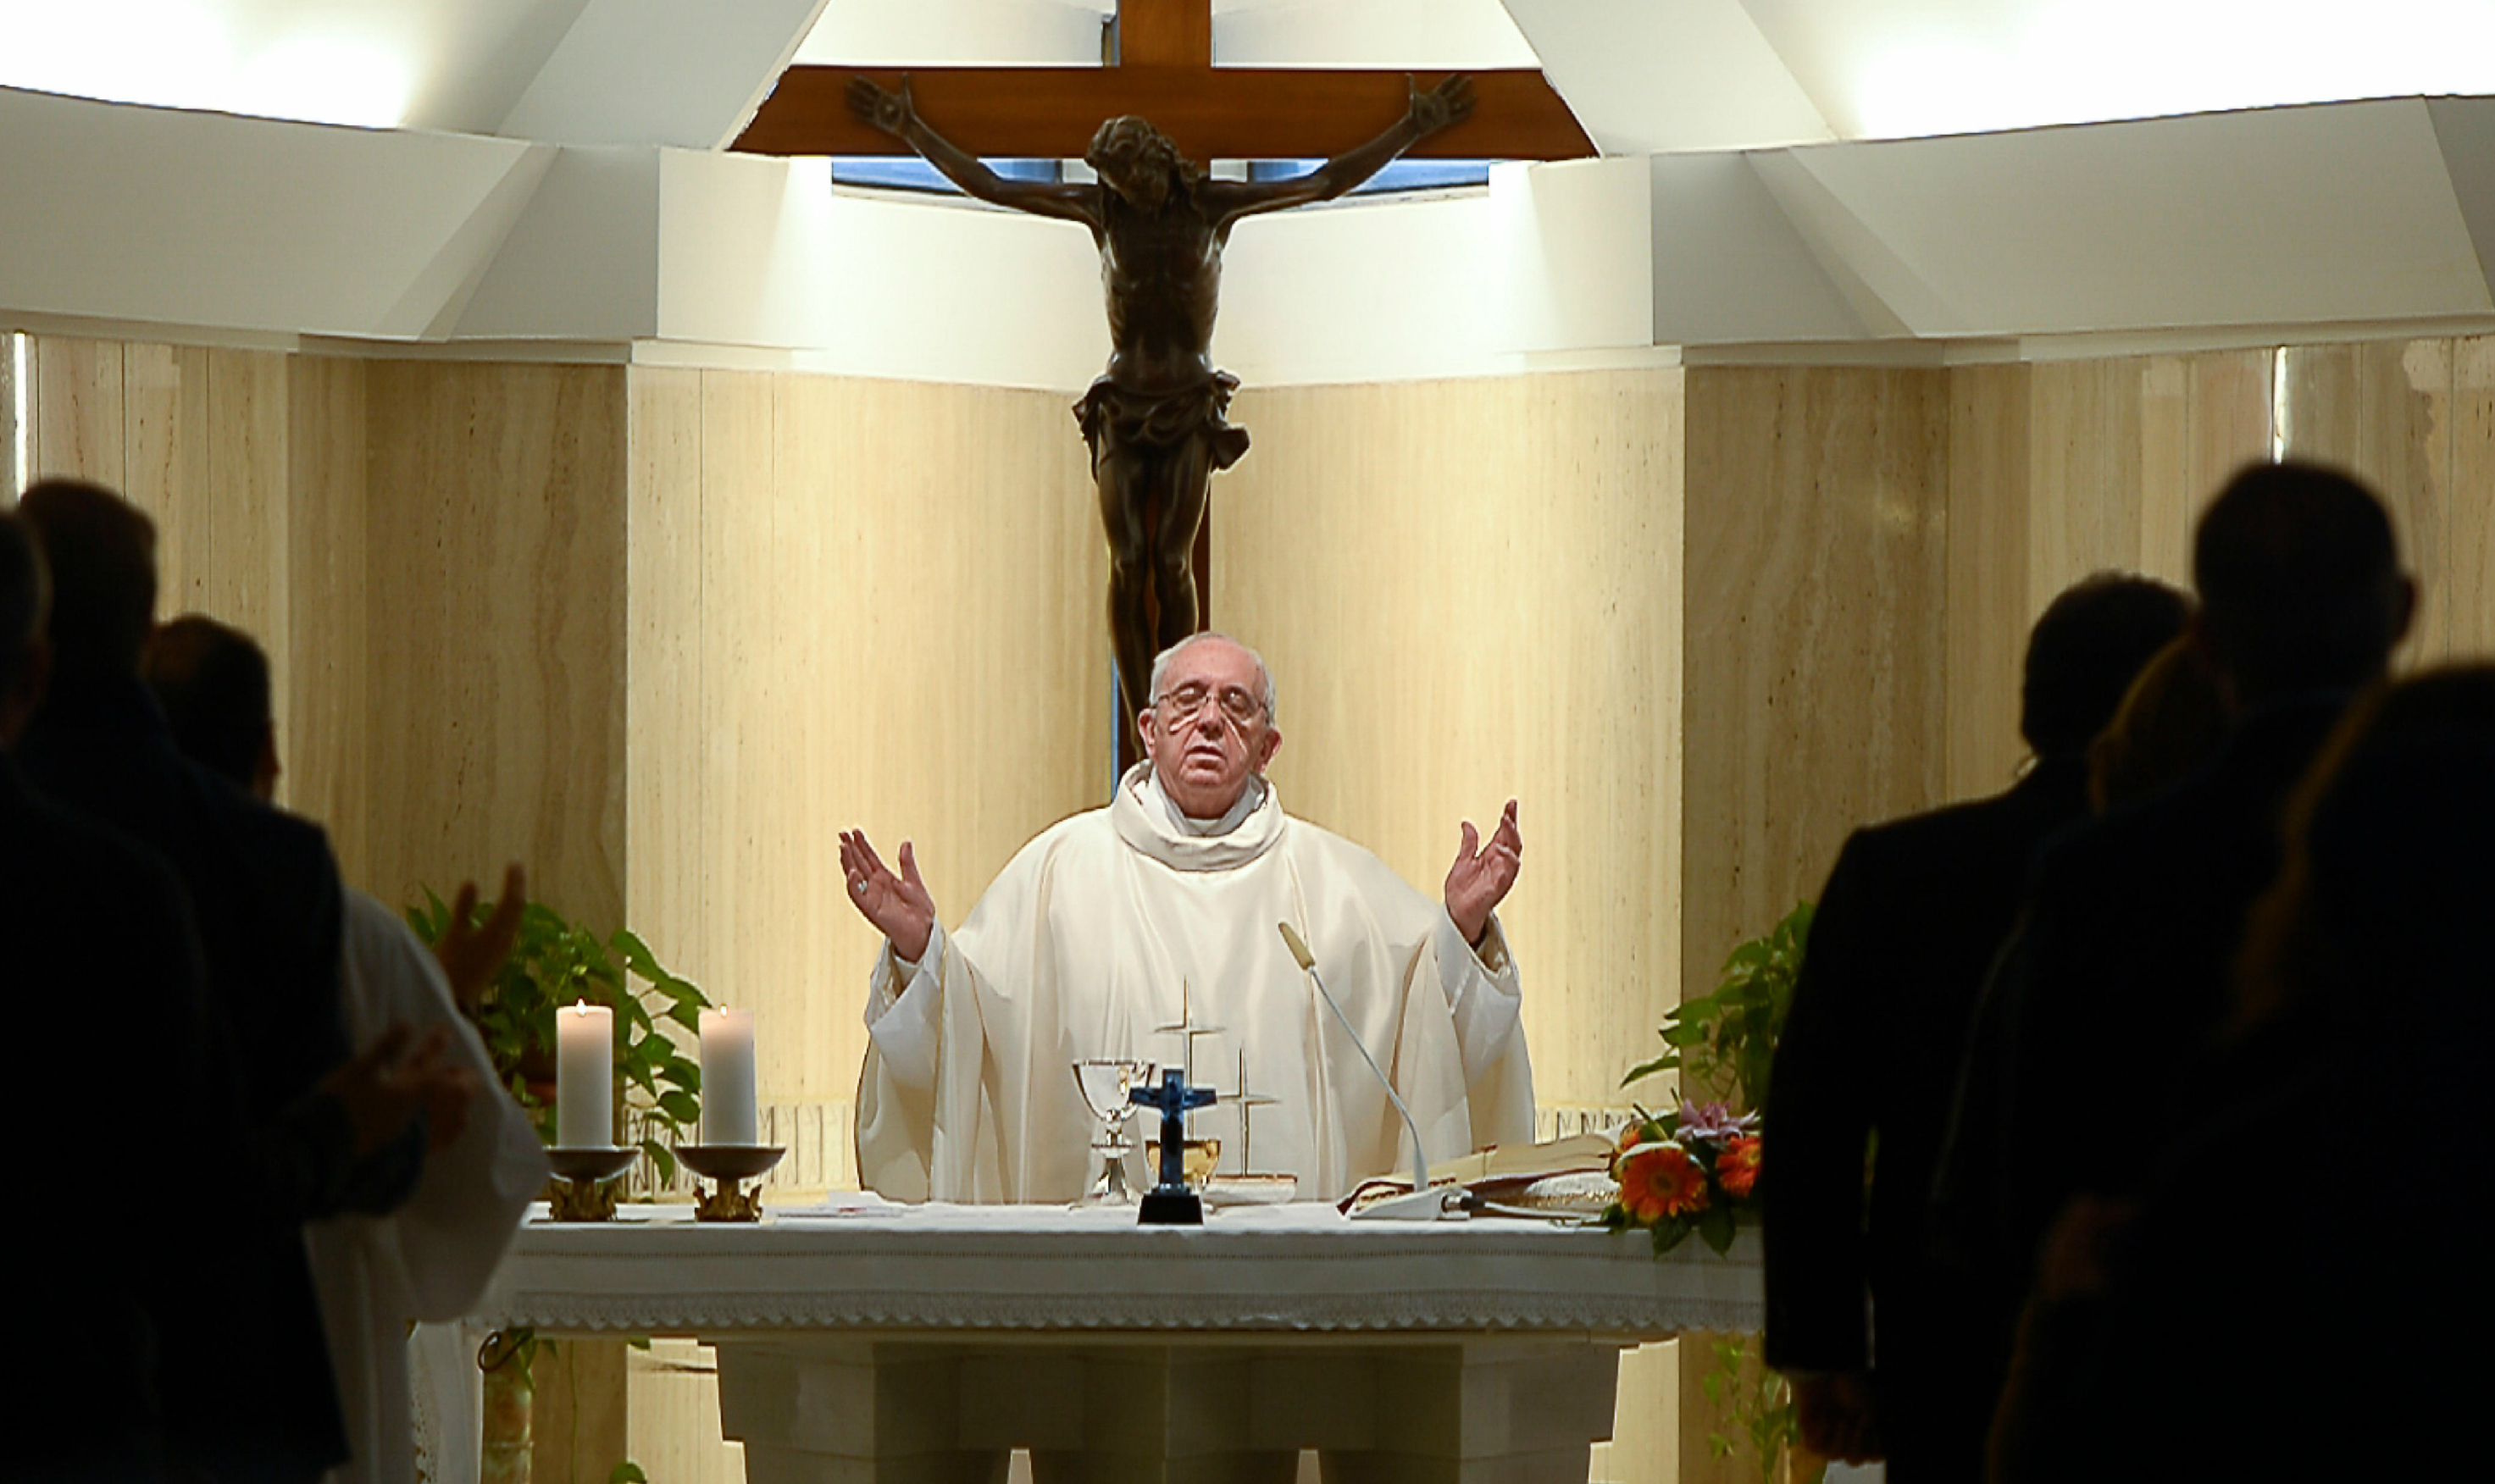 Pope Francis celebrating Mass in Santa Marta on Monday 25th of May 2015